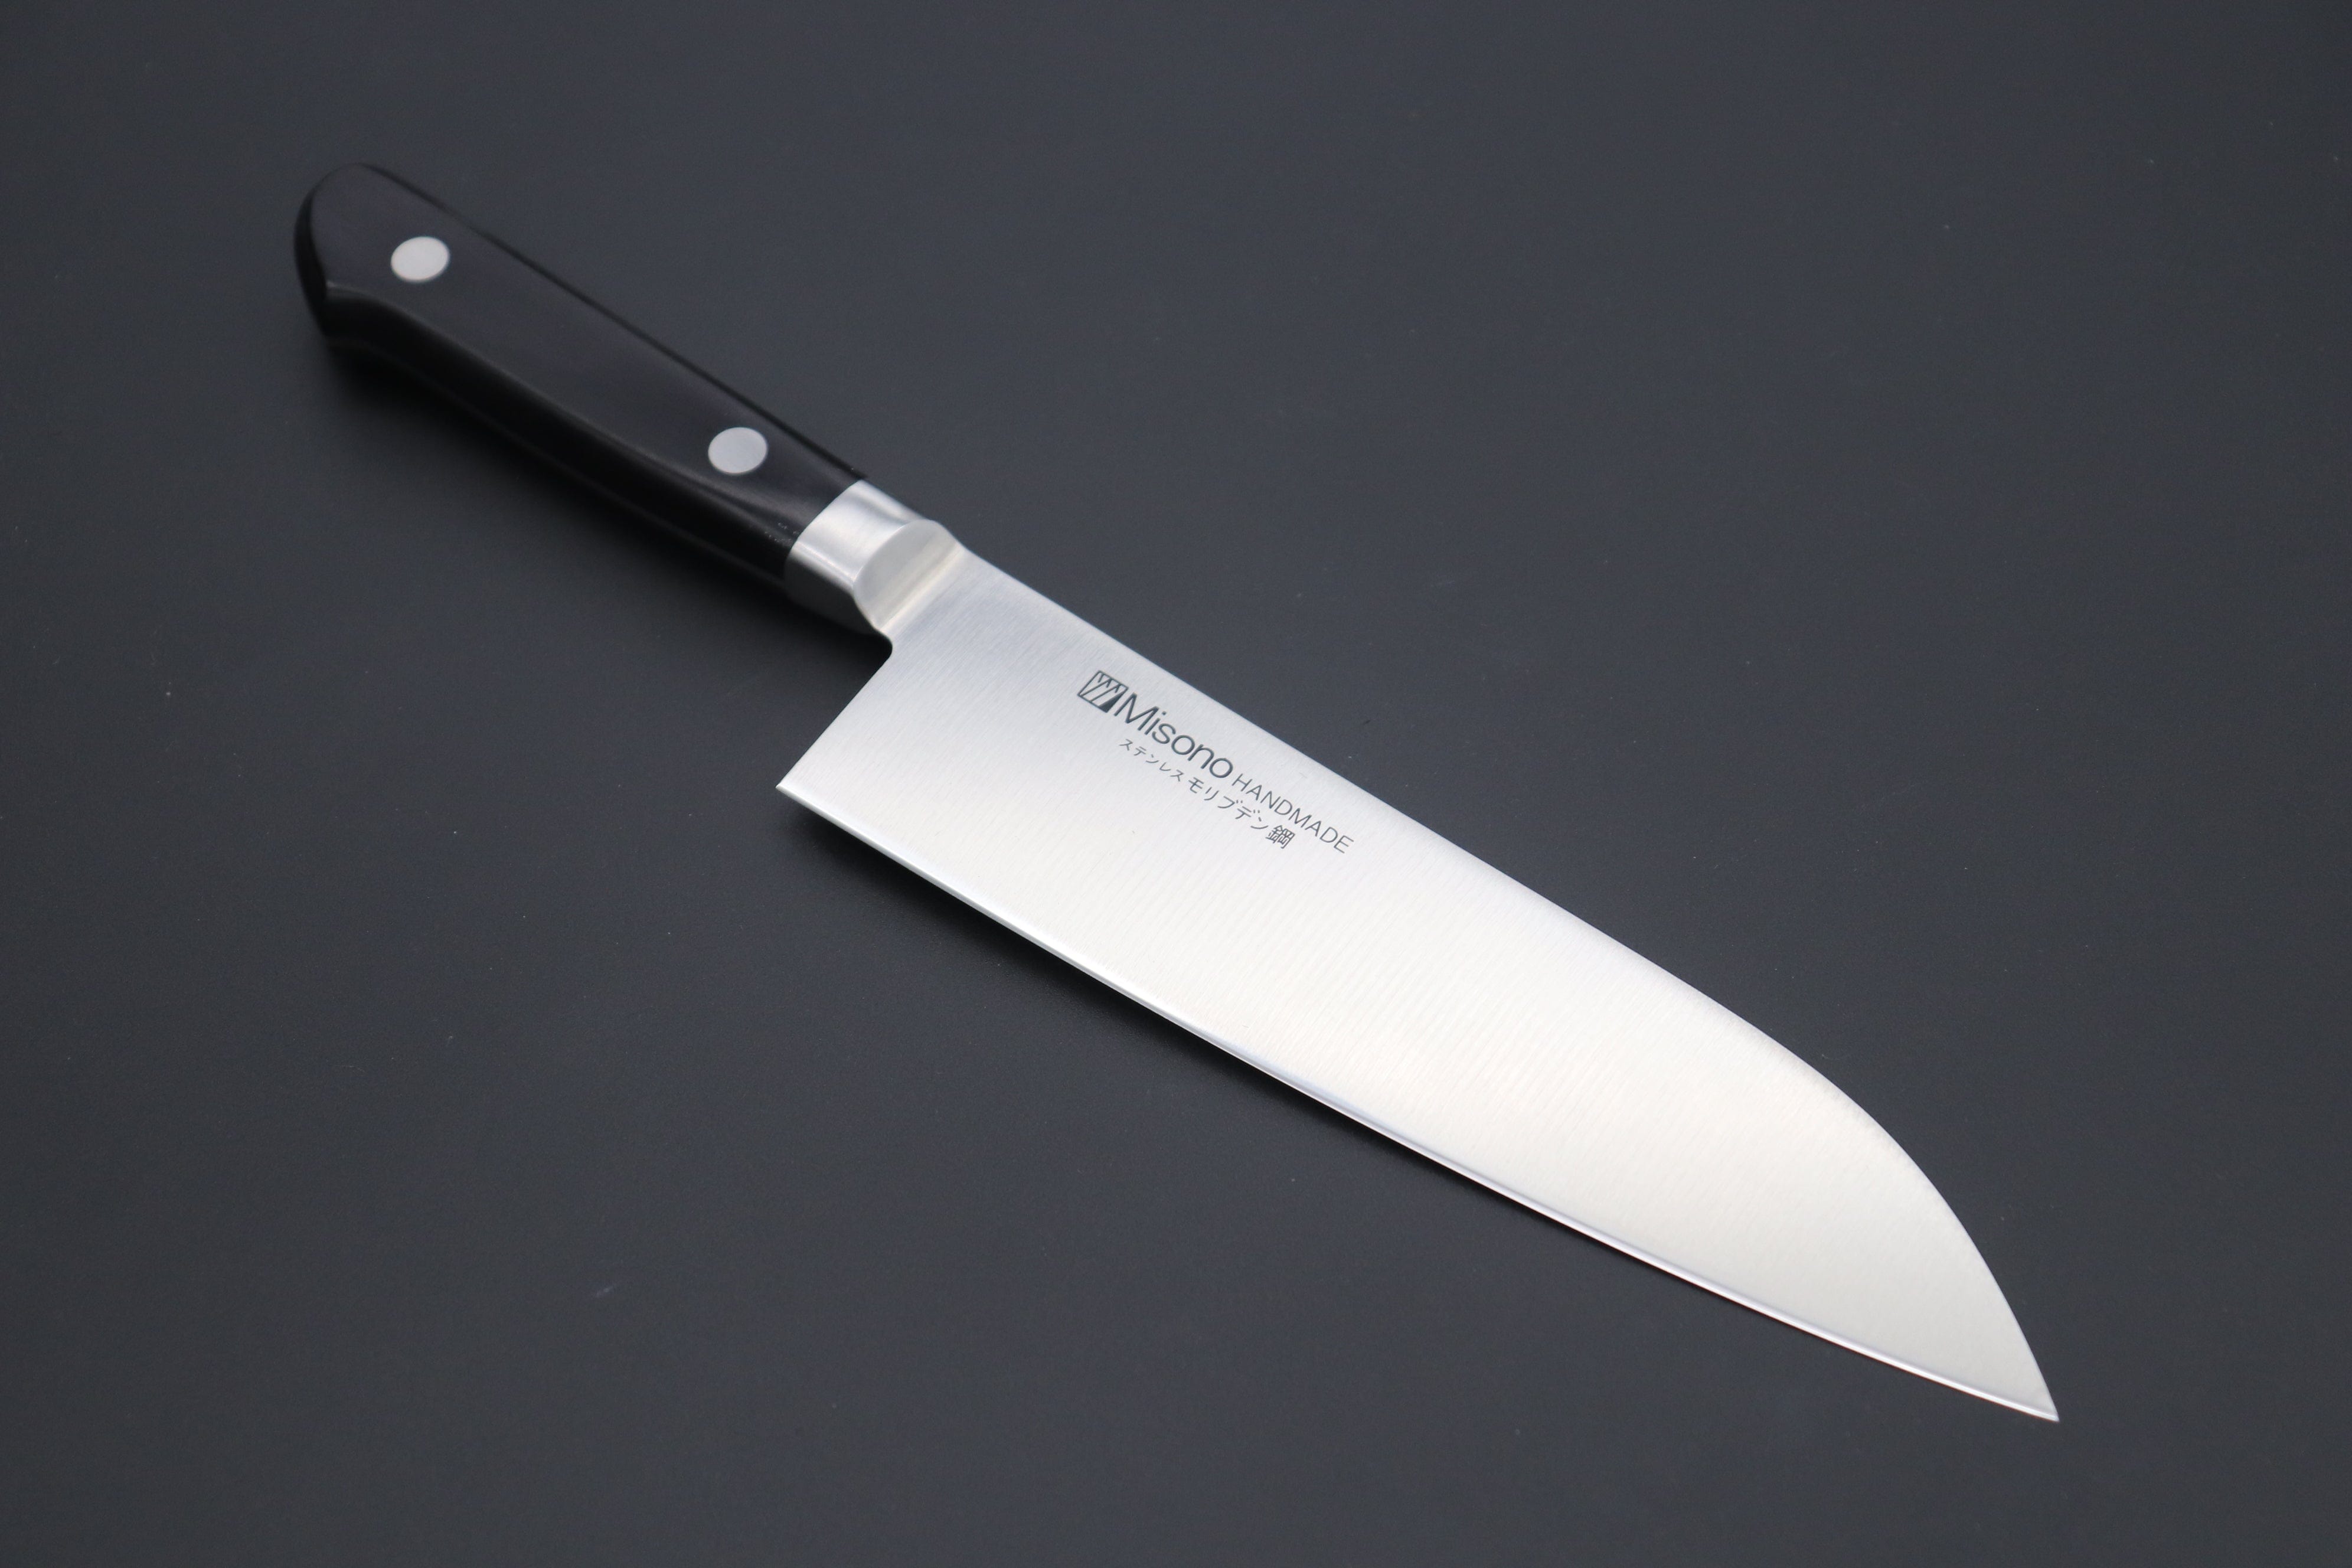 Professional Chef Knife 30 cm/12 Made in Italy